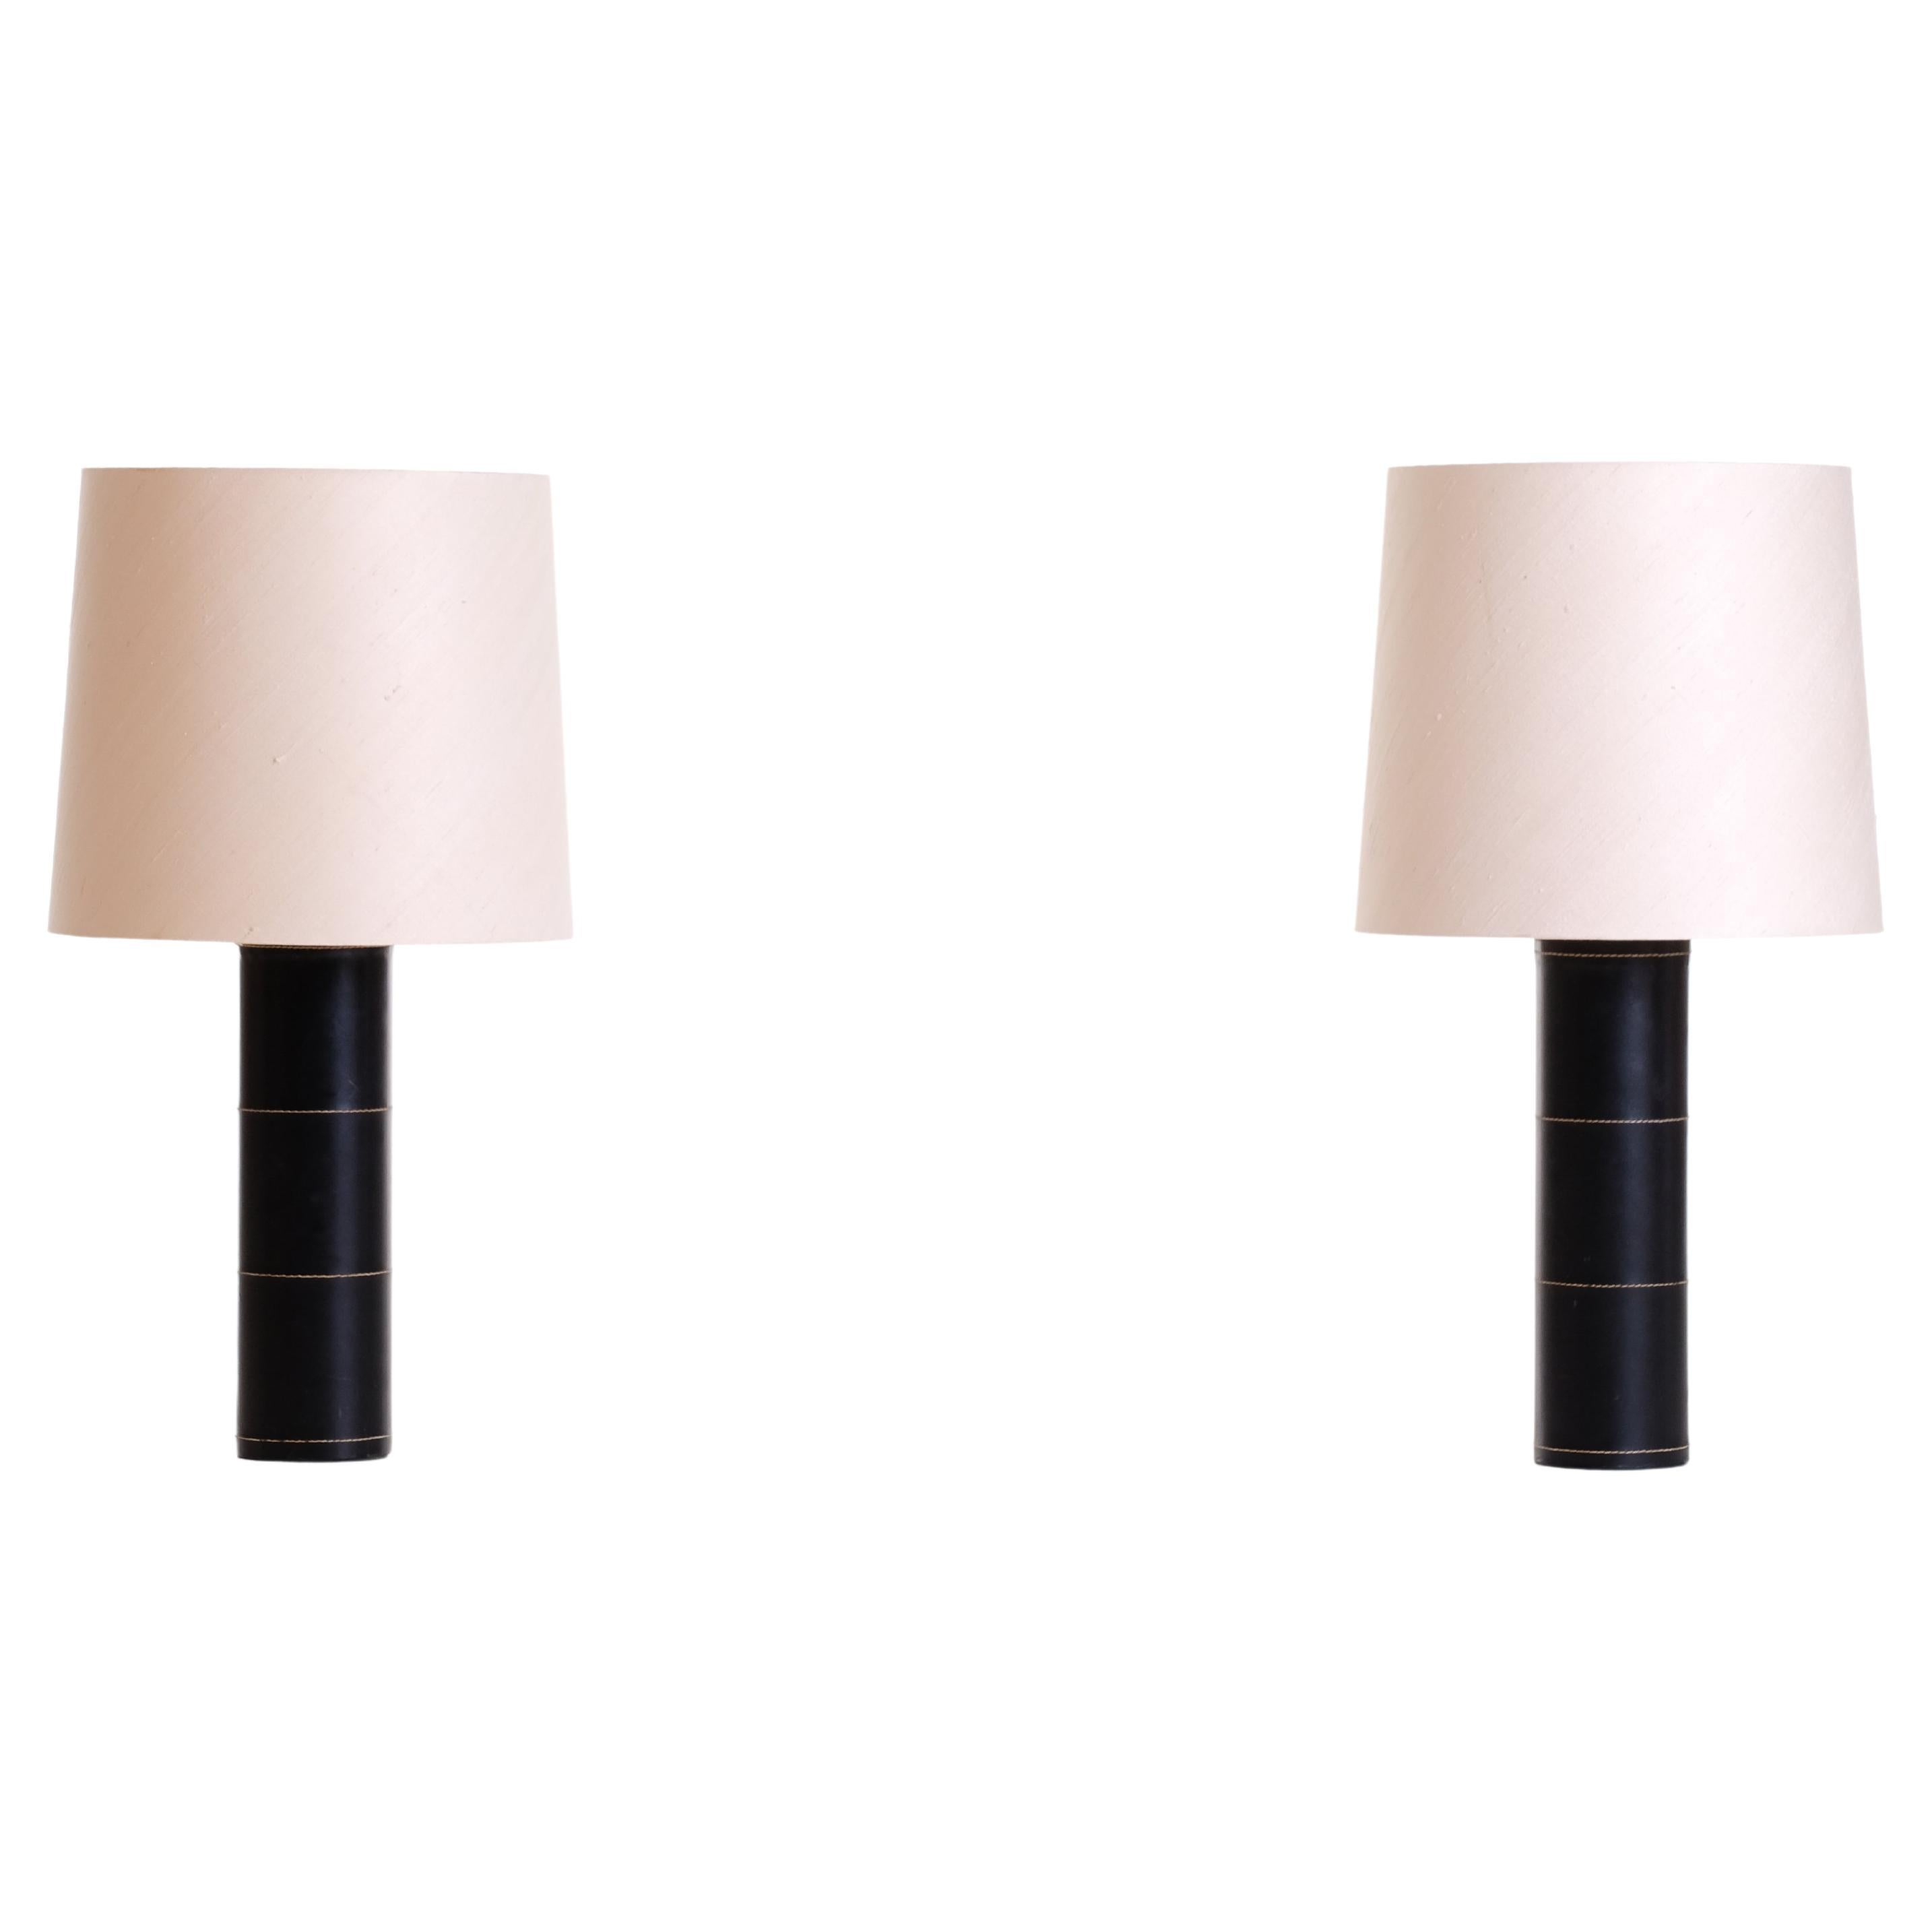 Pair of Black Leather Table Lamps by Bergboms, Sweden, 1960s